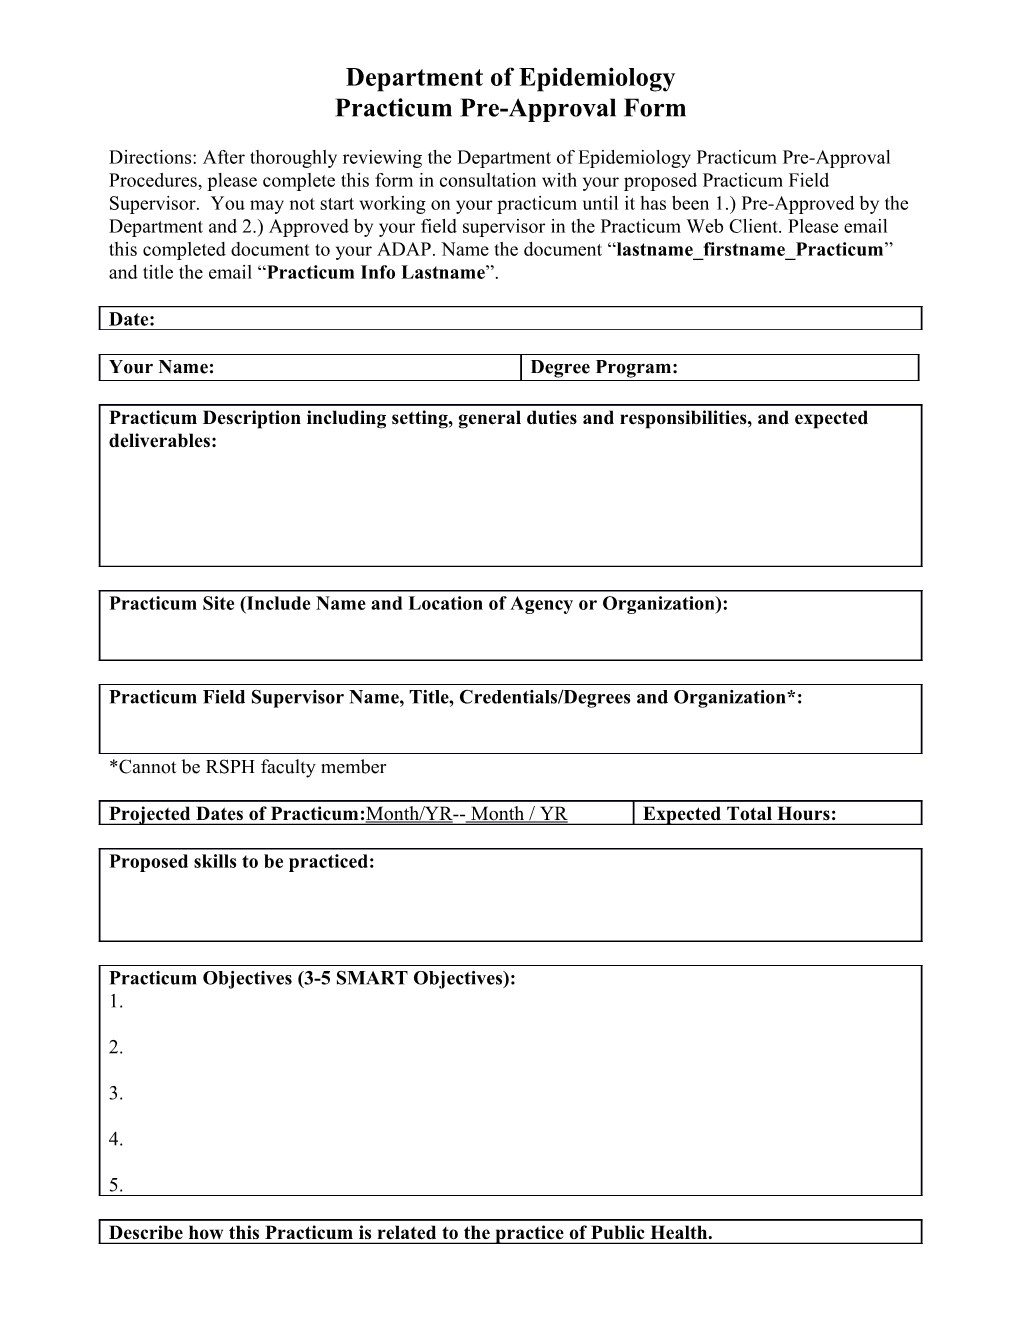 Practicum Pre-Approval Form